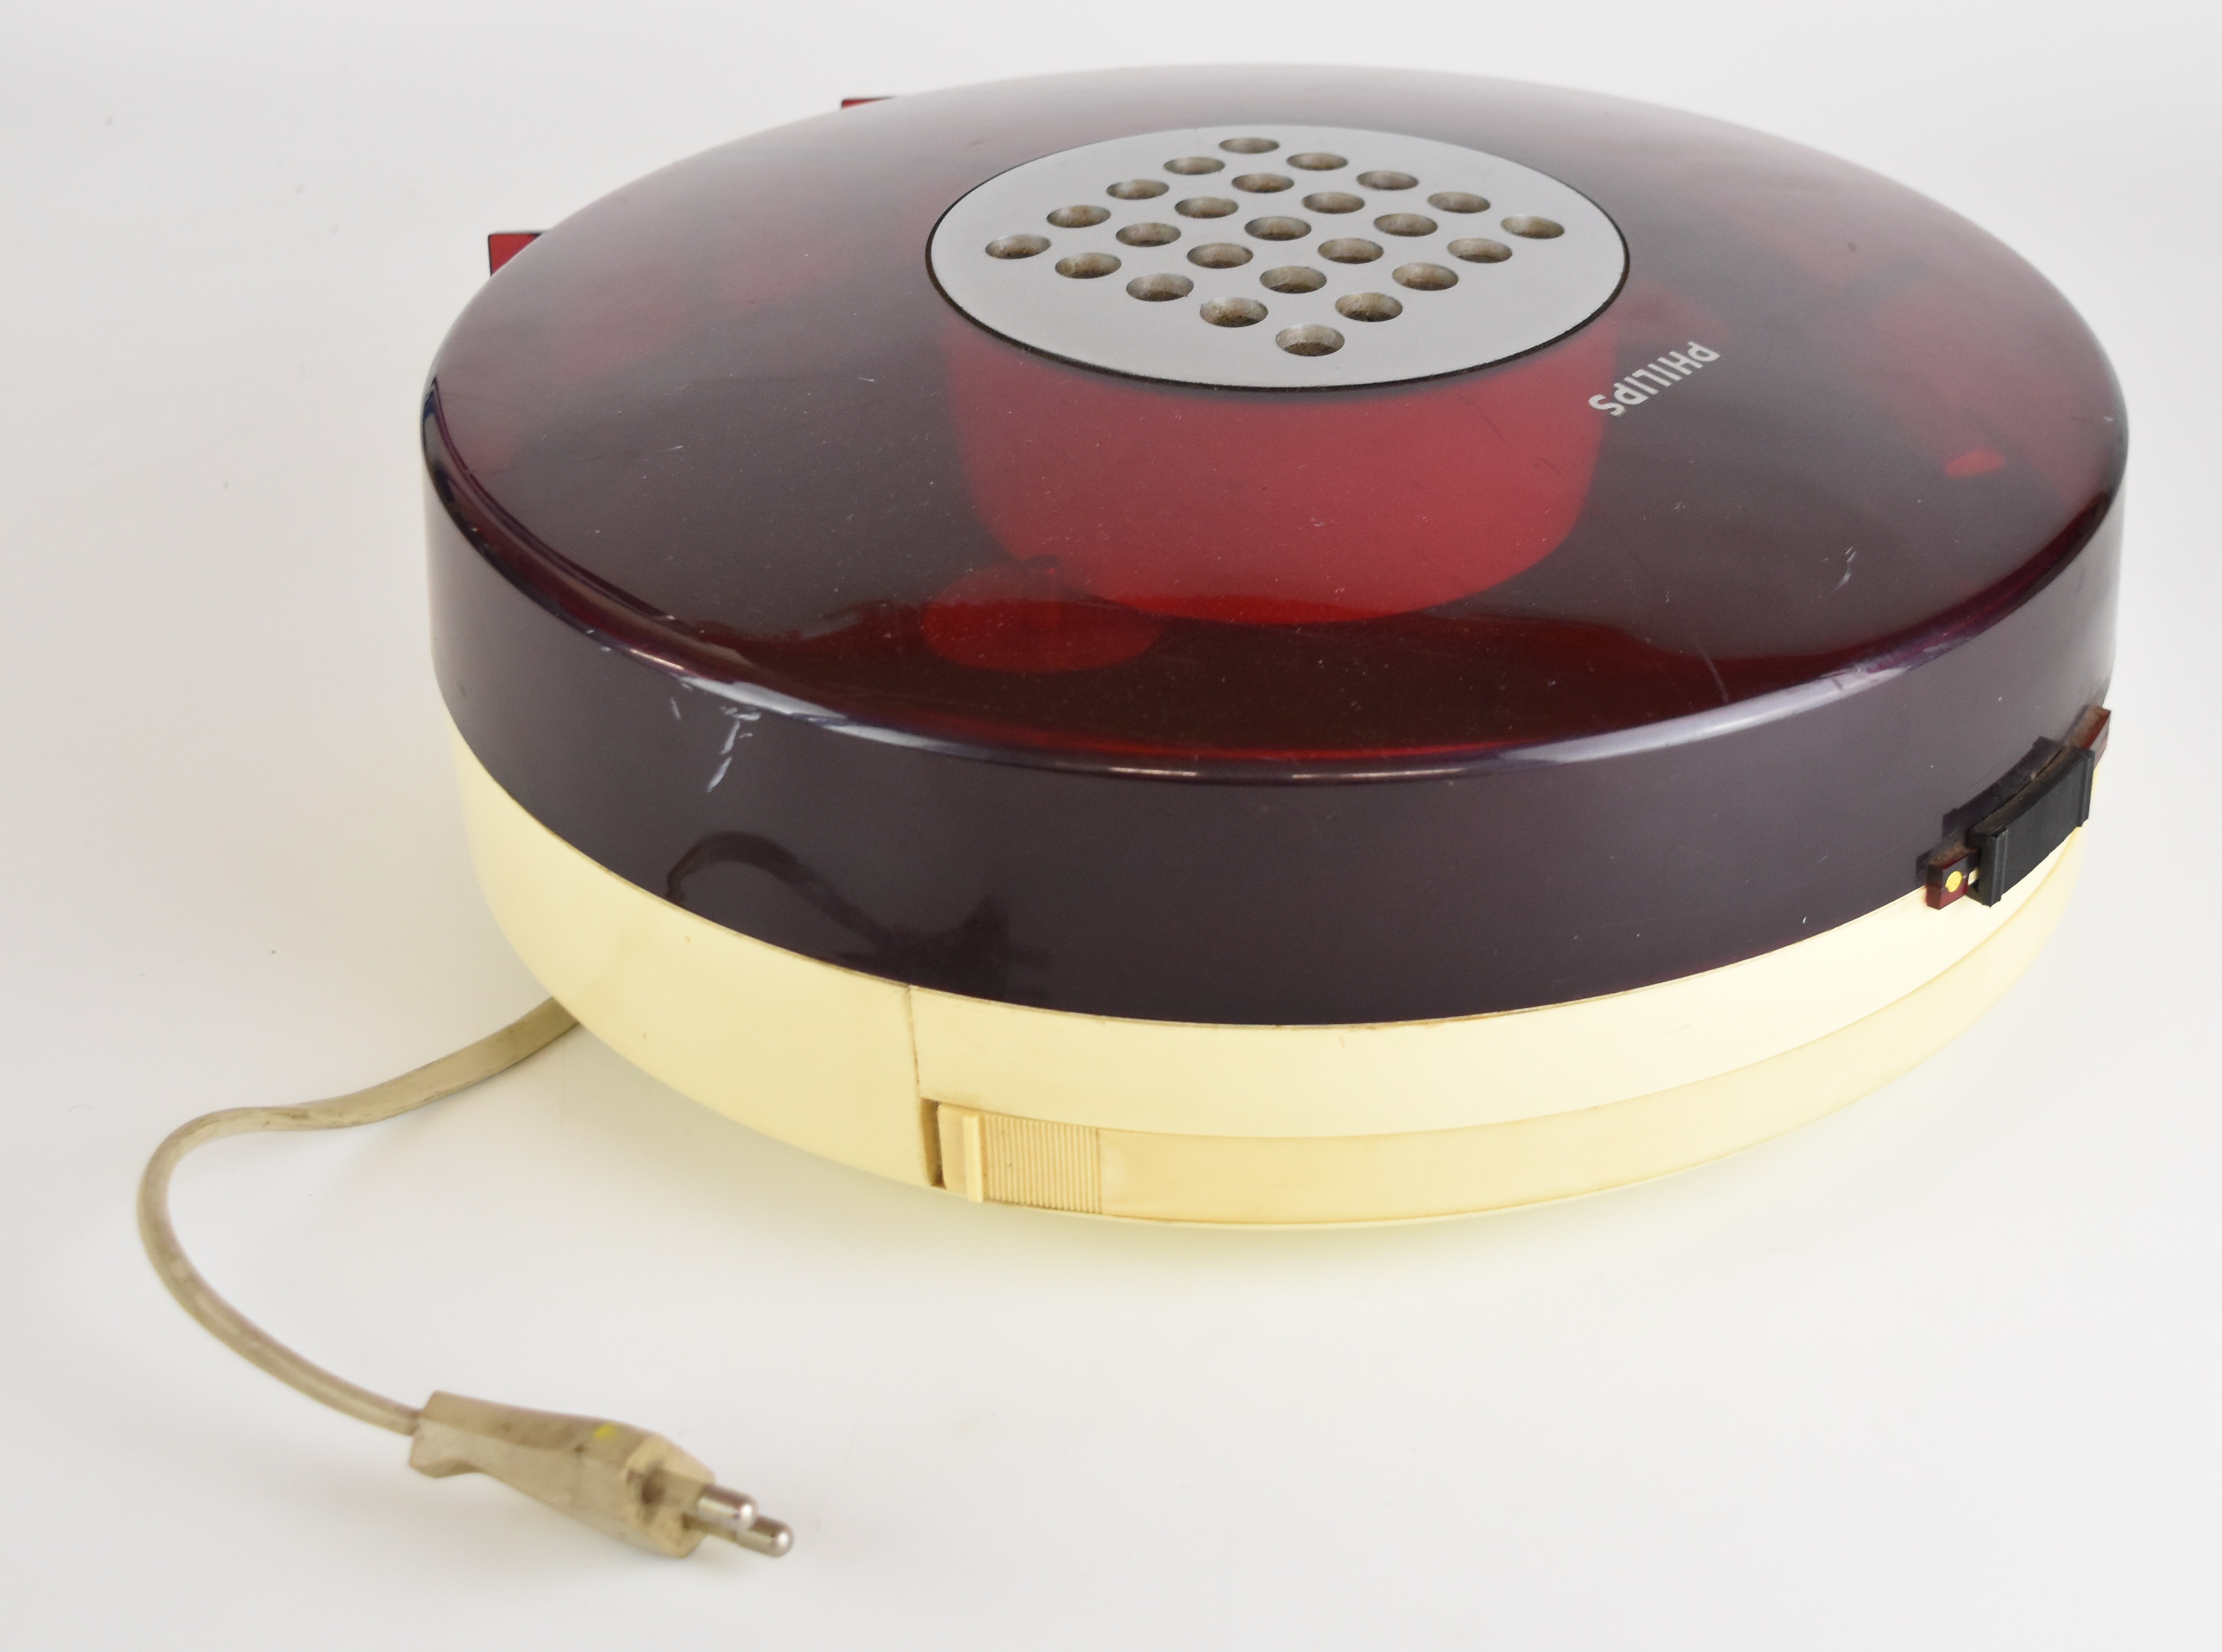 Philips retro UFO record player, model 22GF303/15L, with red plastic cover incorporating speaker